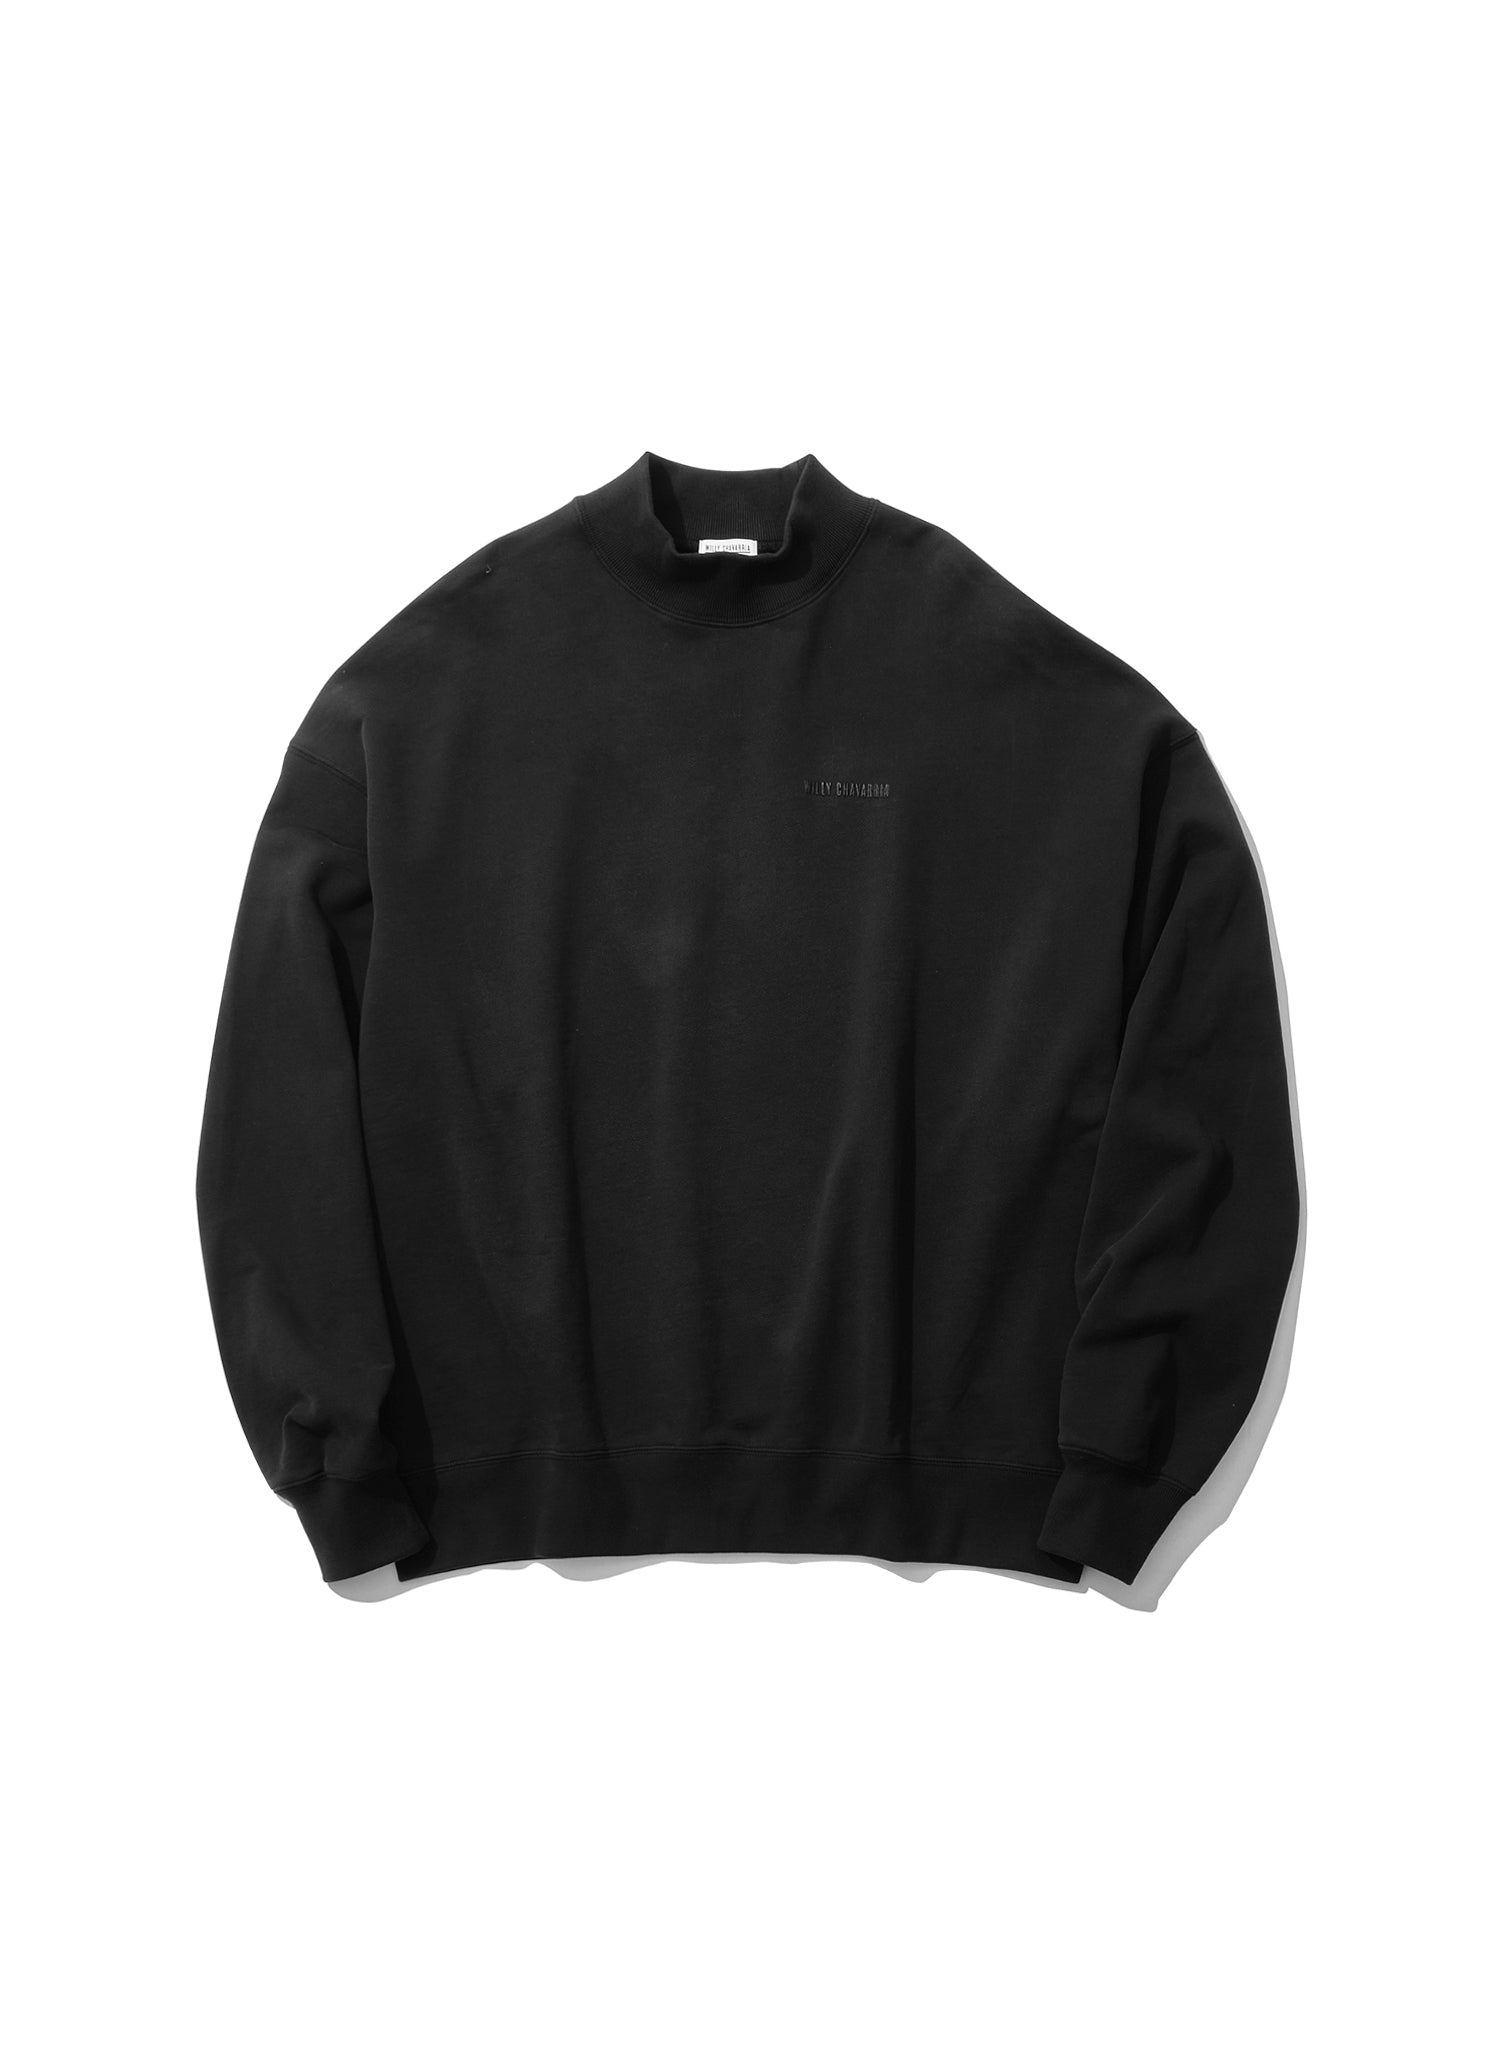 WILLY CHAVARRIA / MOCK NECK SWEAT SOLID BLACK